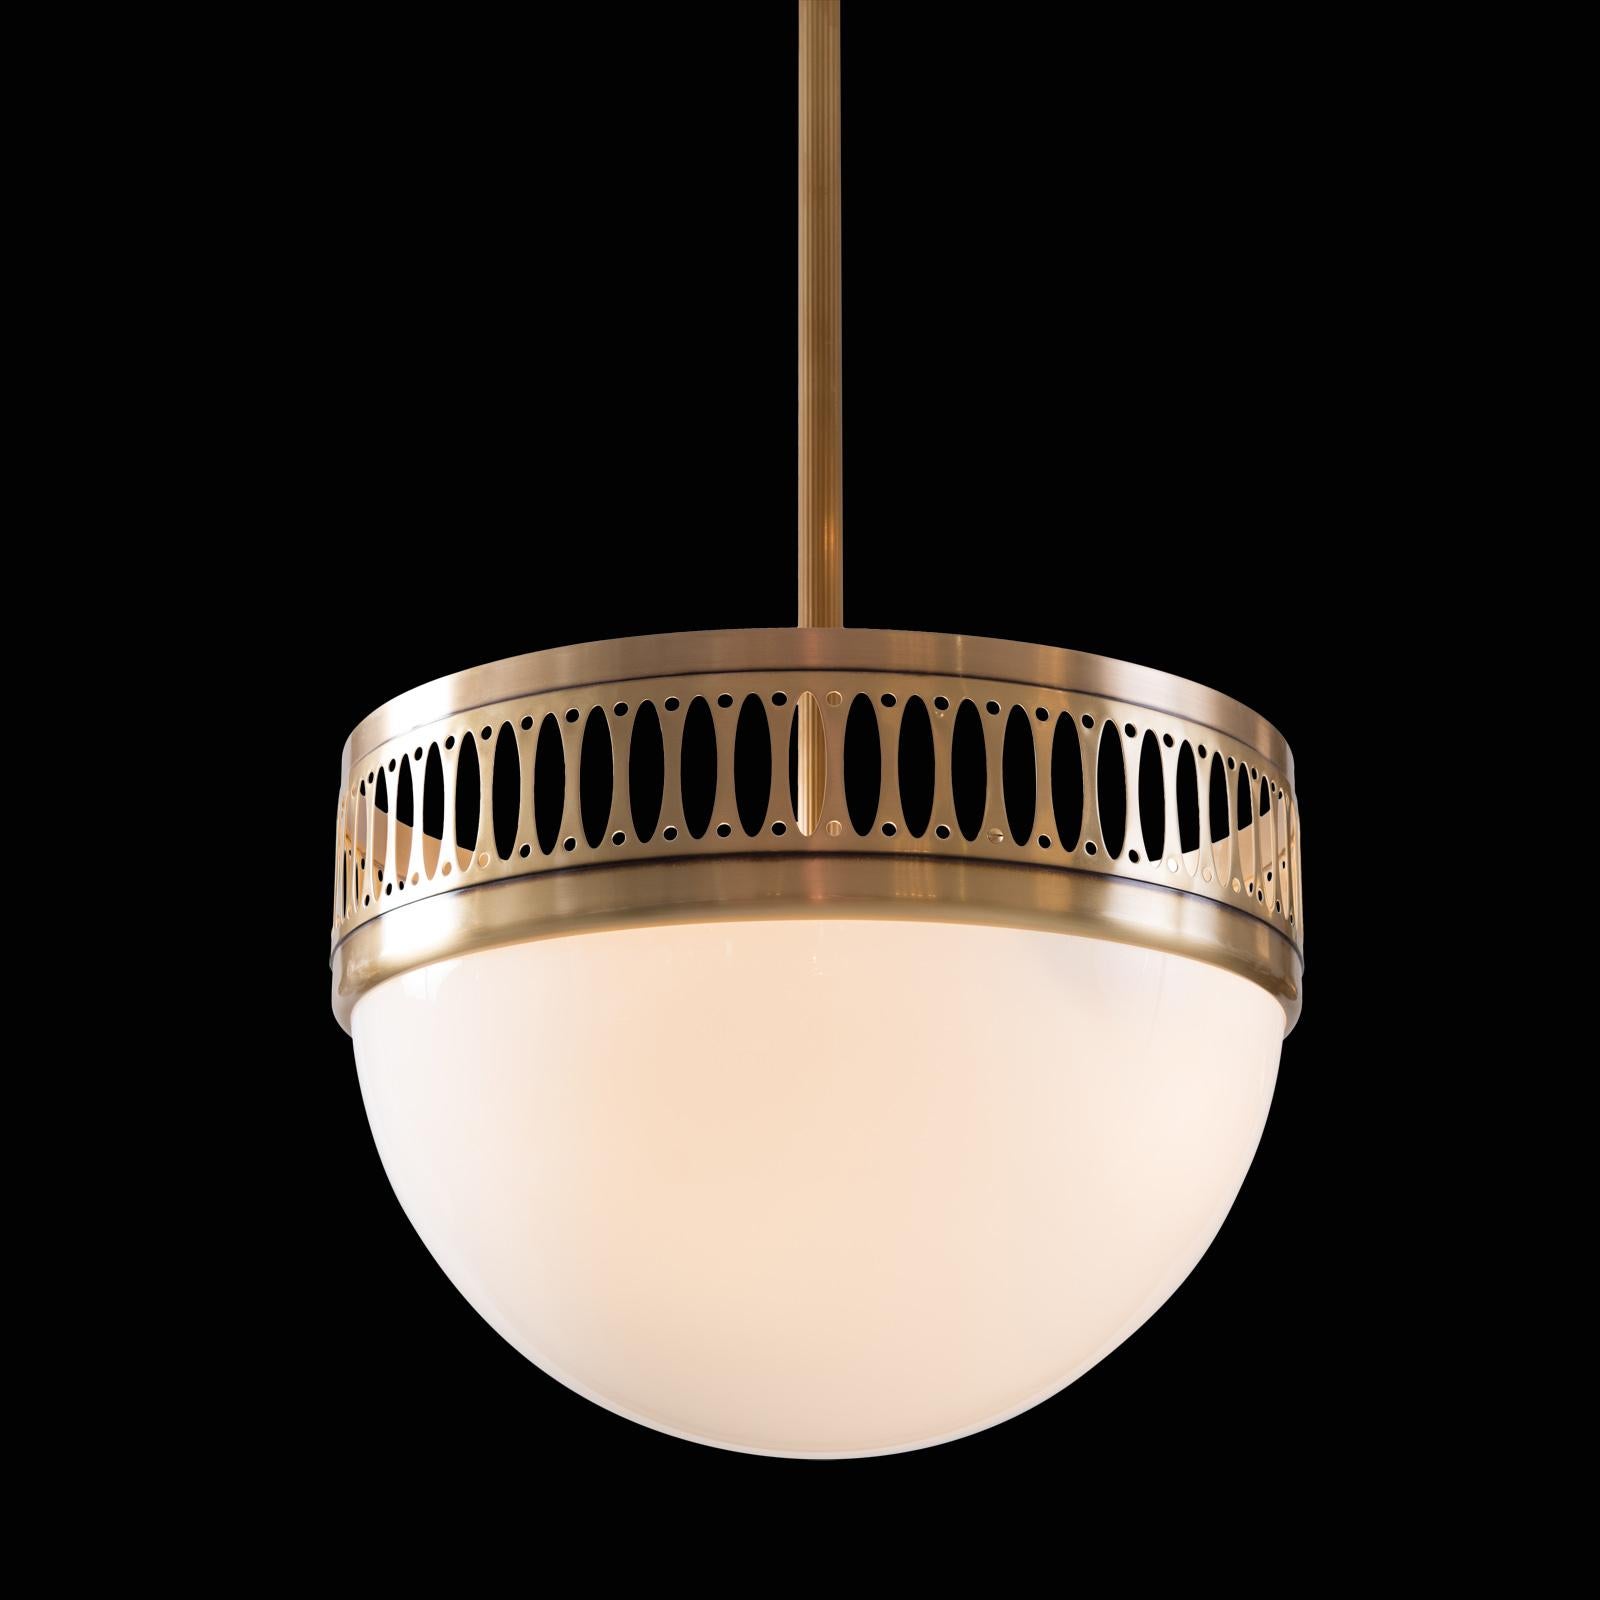 Very elegant pendant-lamp - total drop custom - a smaller Version is available- see 